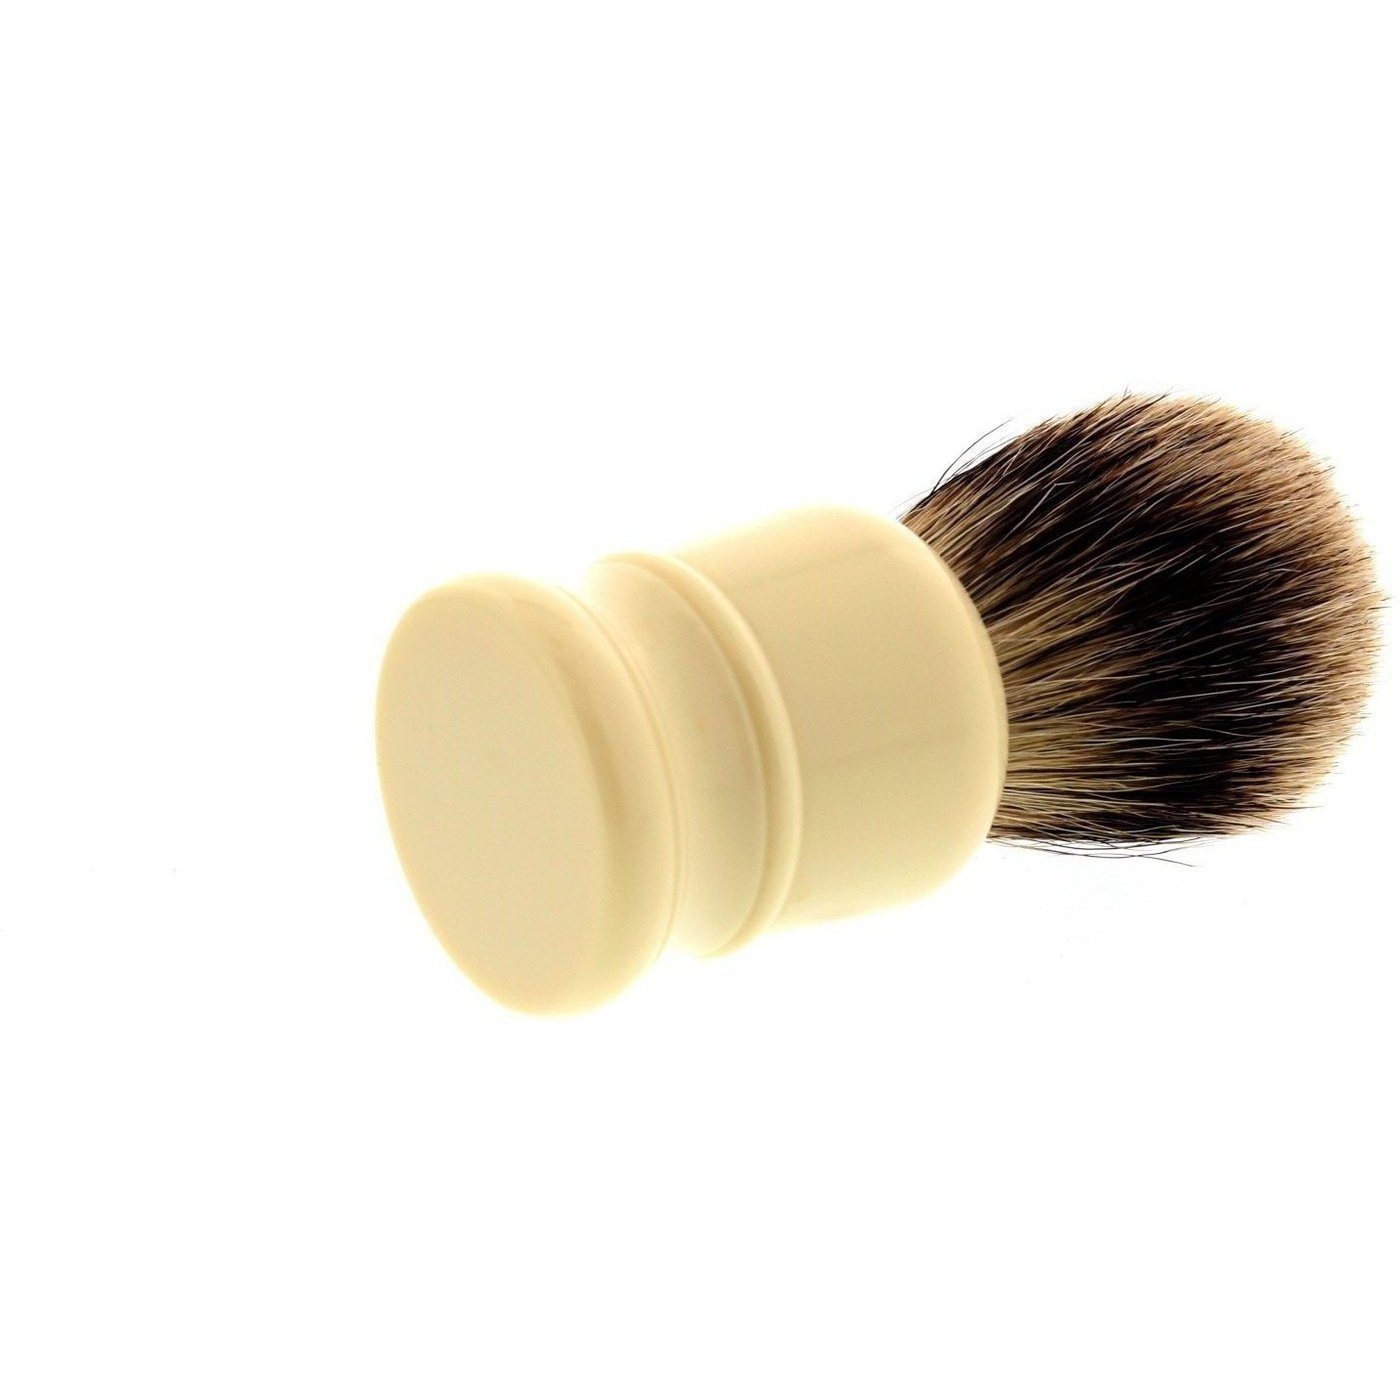 Product image 3 for Simpson Classic CL 2 Best Badger Shaving Brush (CL2B)